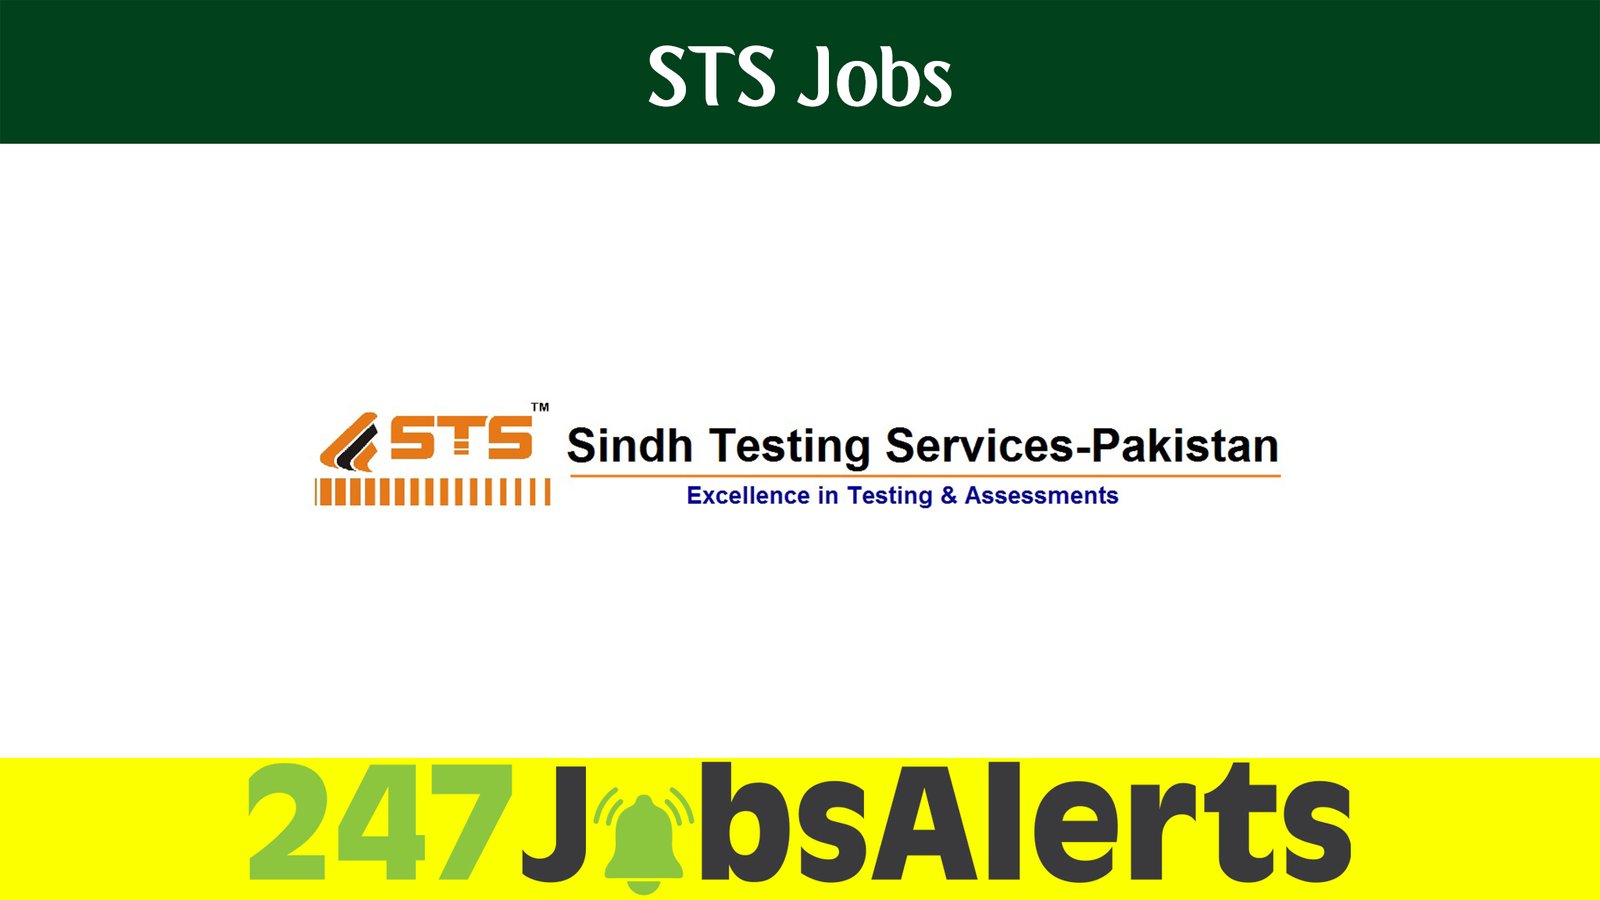 STS Jobs